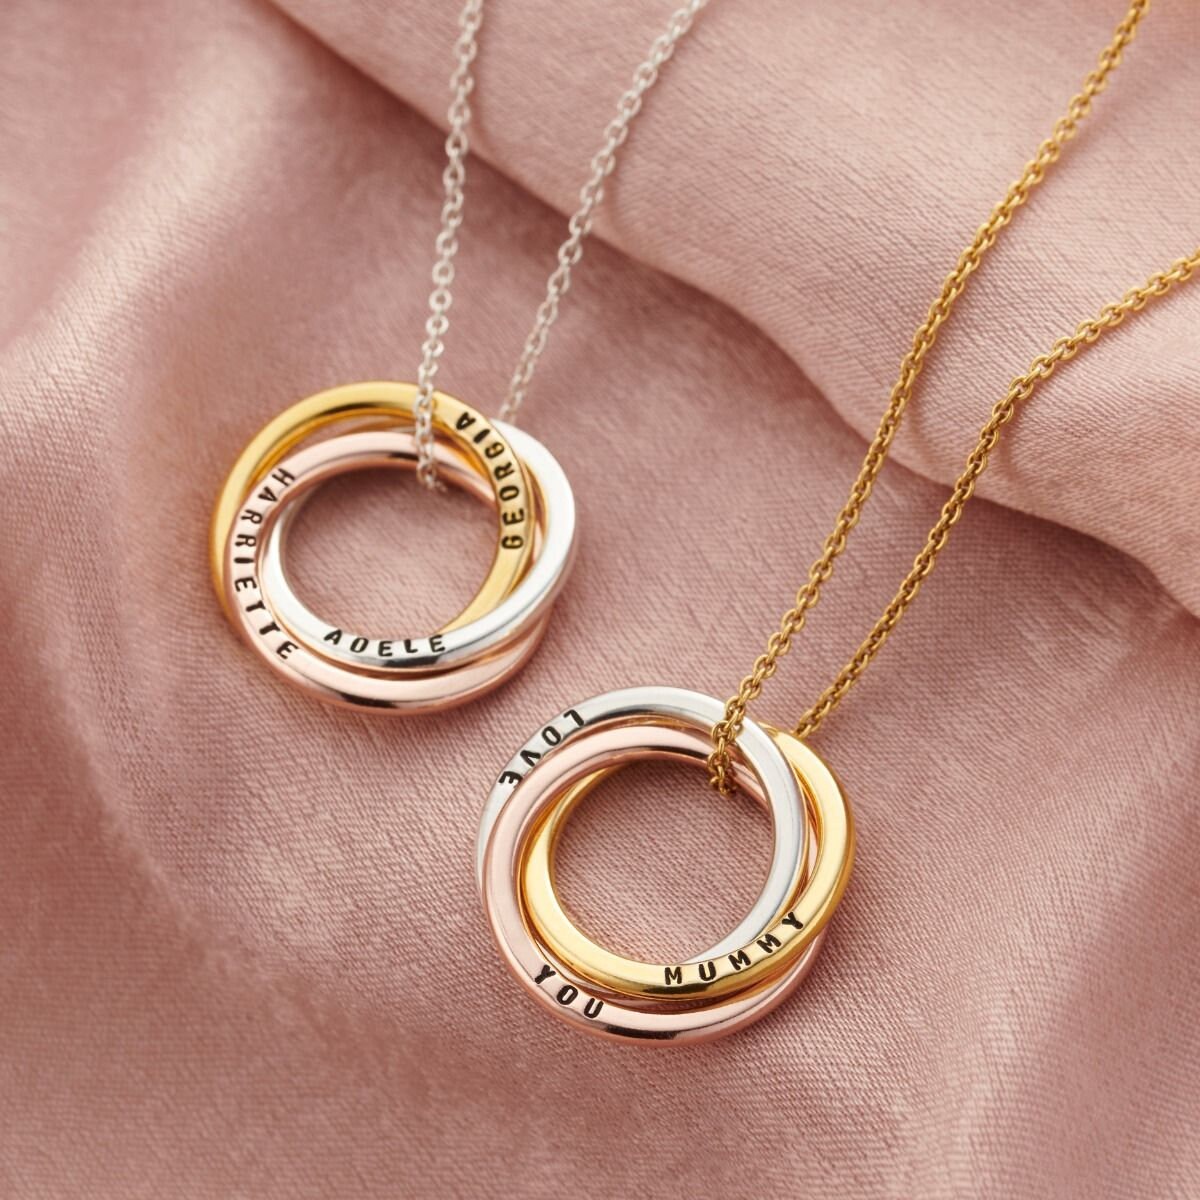 INDI - Mixed Russian Rings Necklace By Lets Etch | Shop Online at Let's  Etch | letsetch.com.au